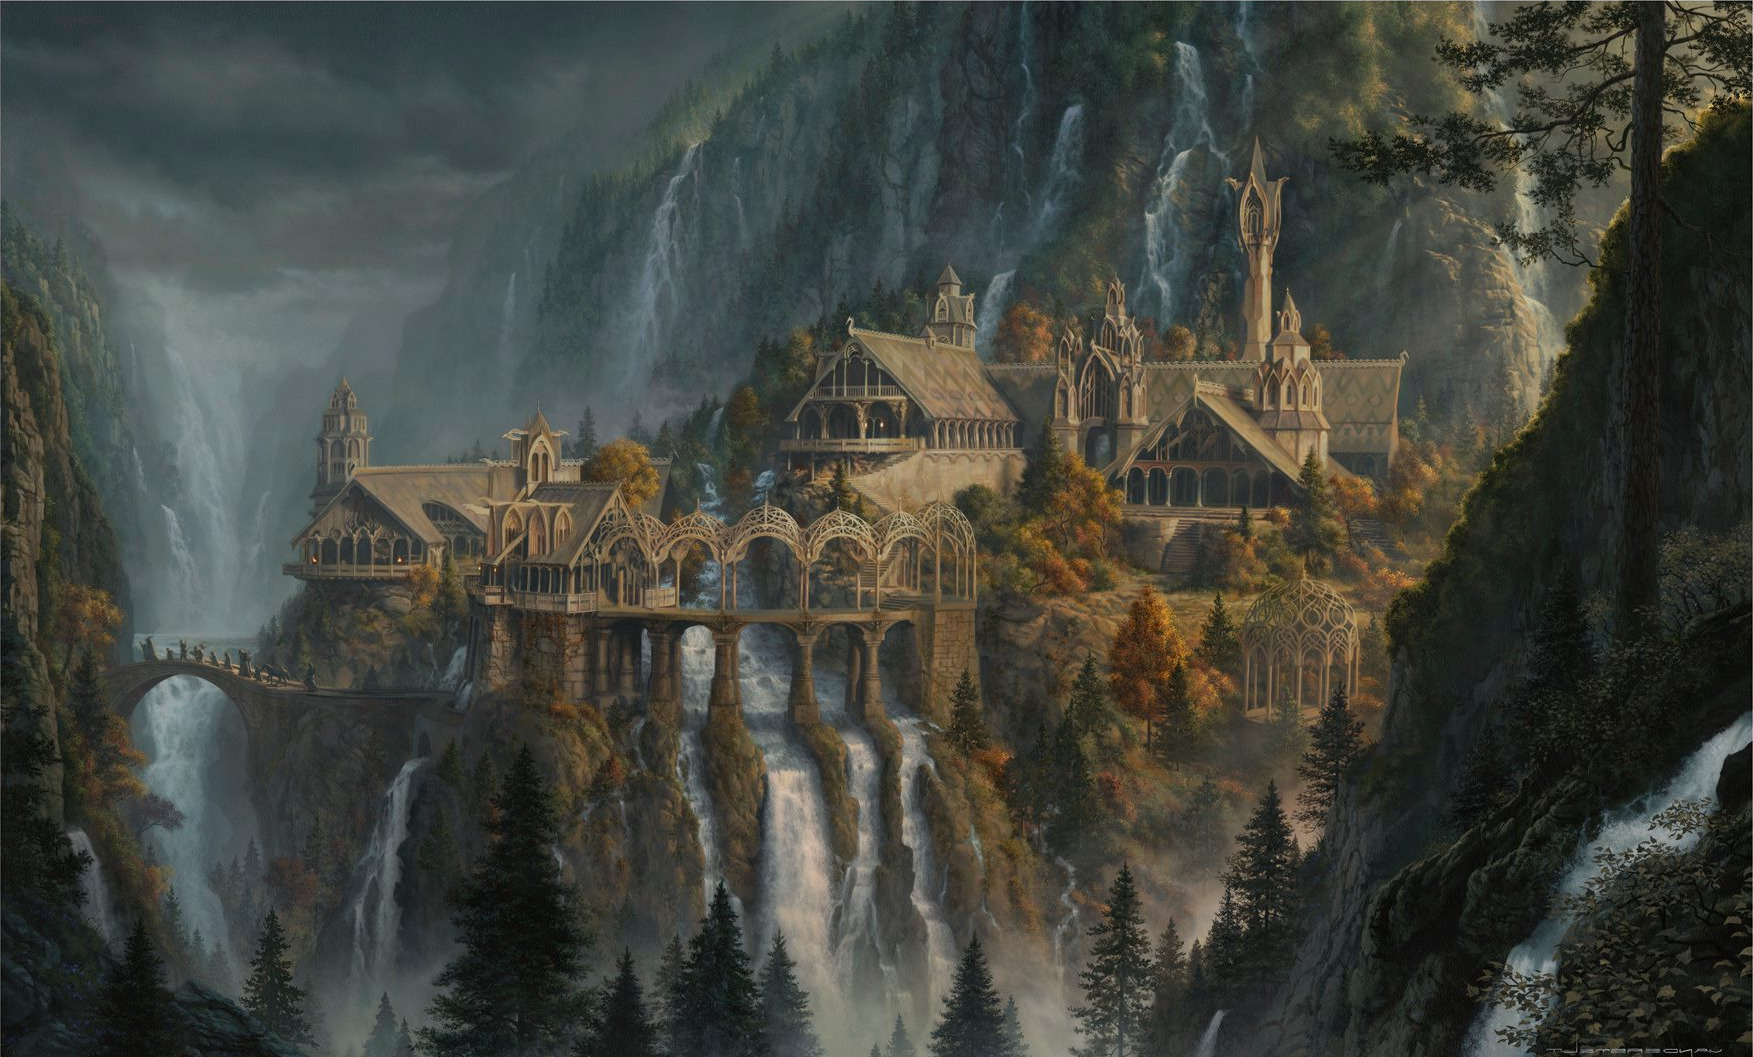 waterfall-j-r-r-tolkien-the-lord-of-the-rings-artwork-rivendell